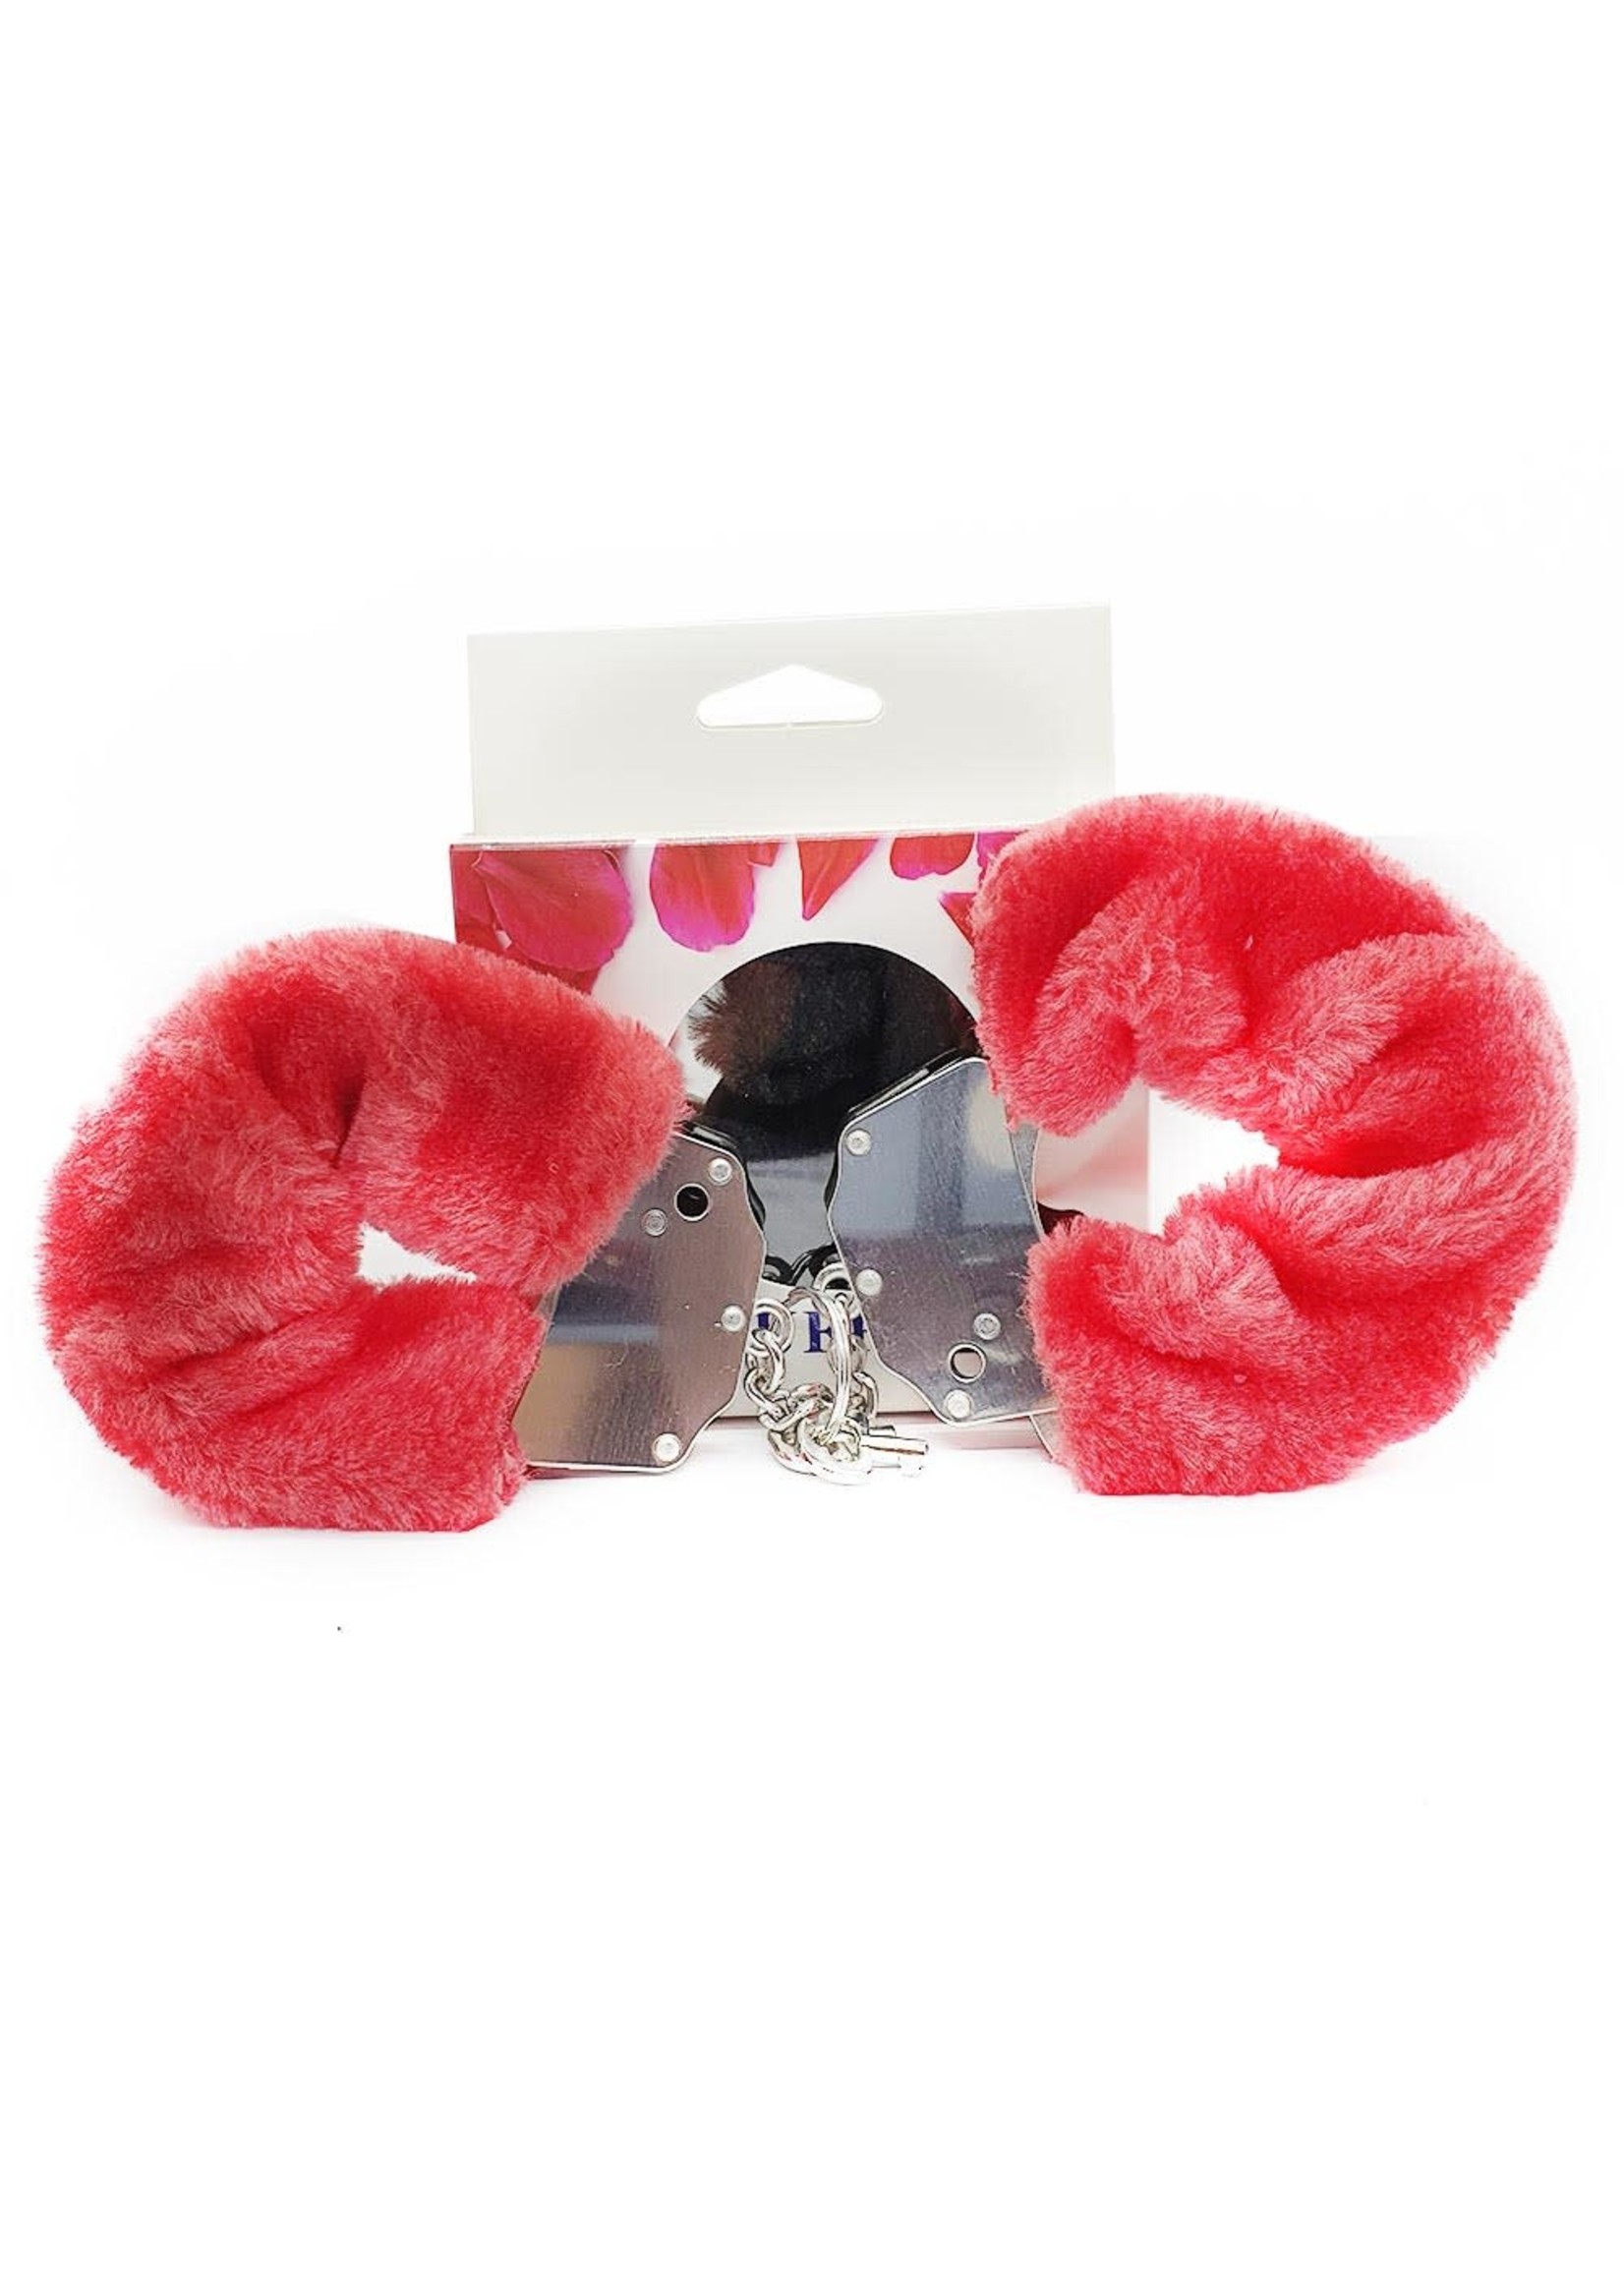 Dusedo Furry handcuffs - red